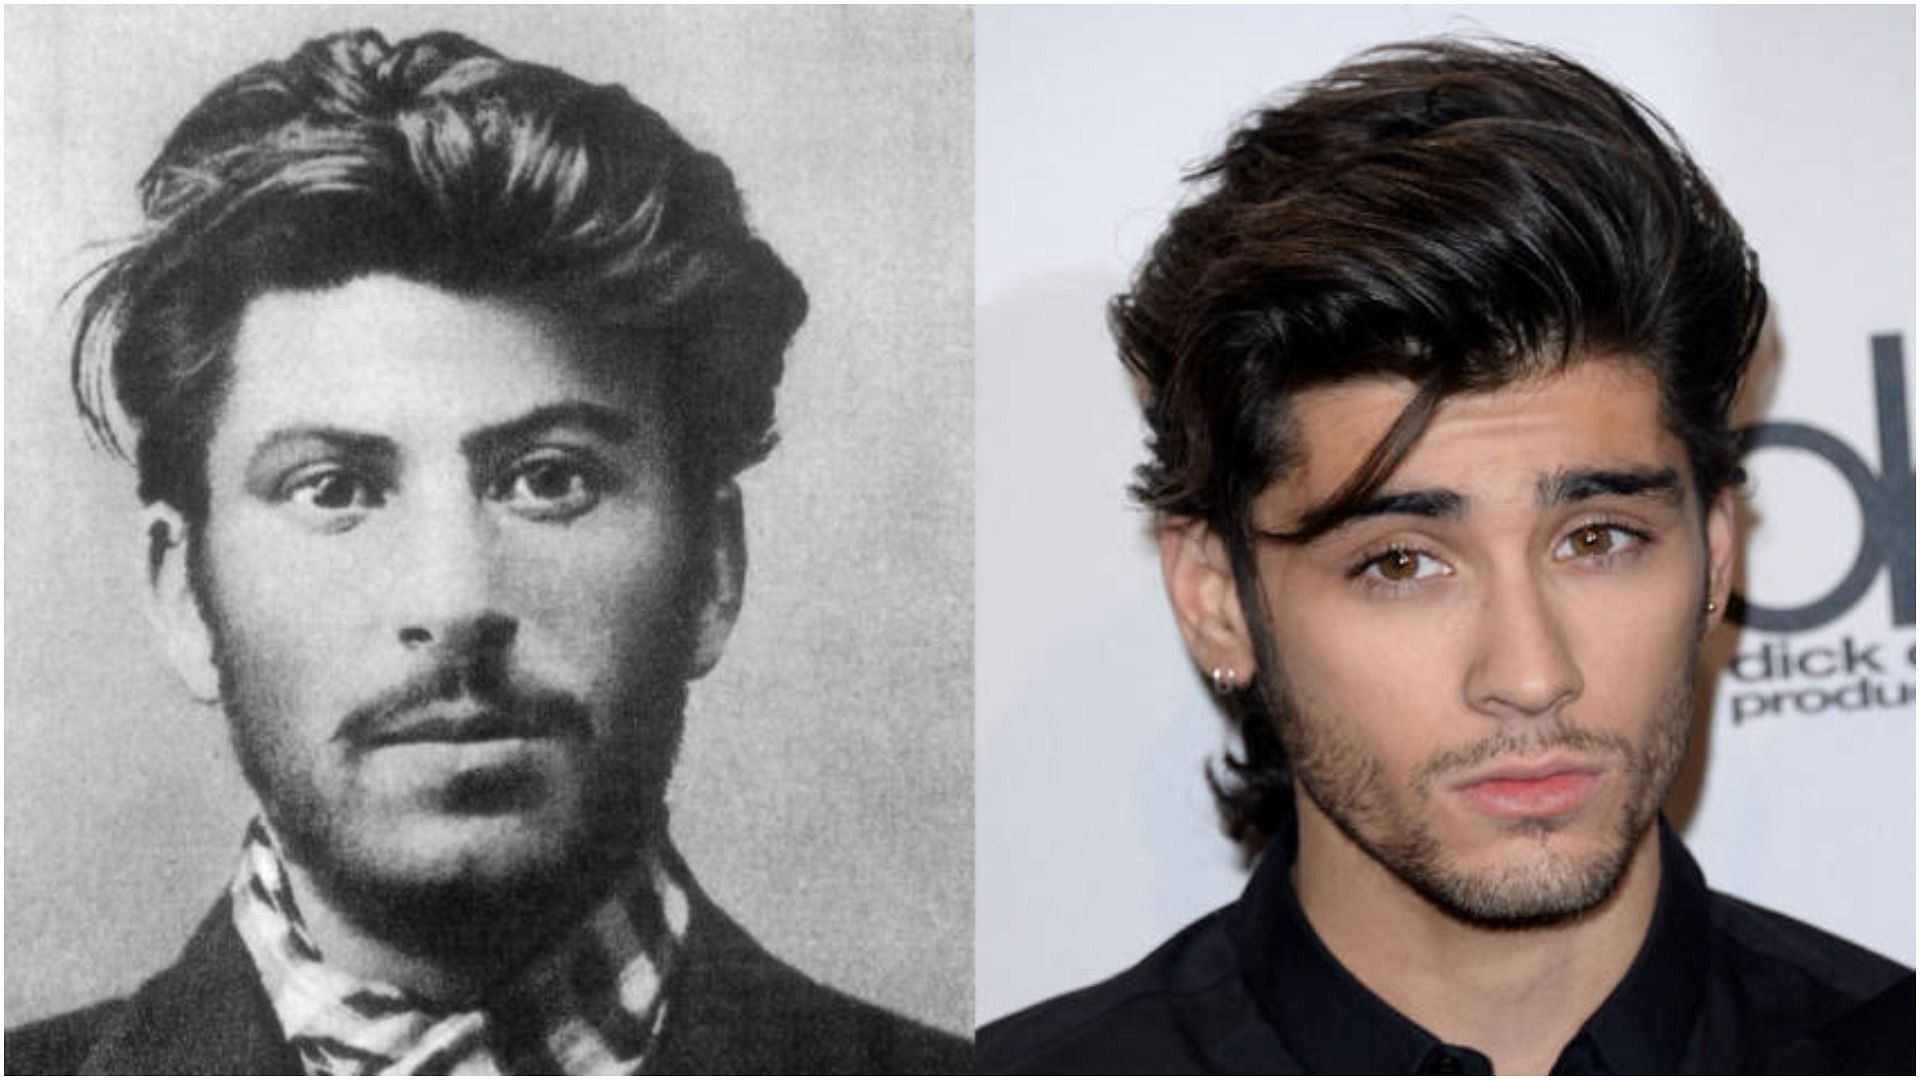 Top 10 celebrity lookalikes from history